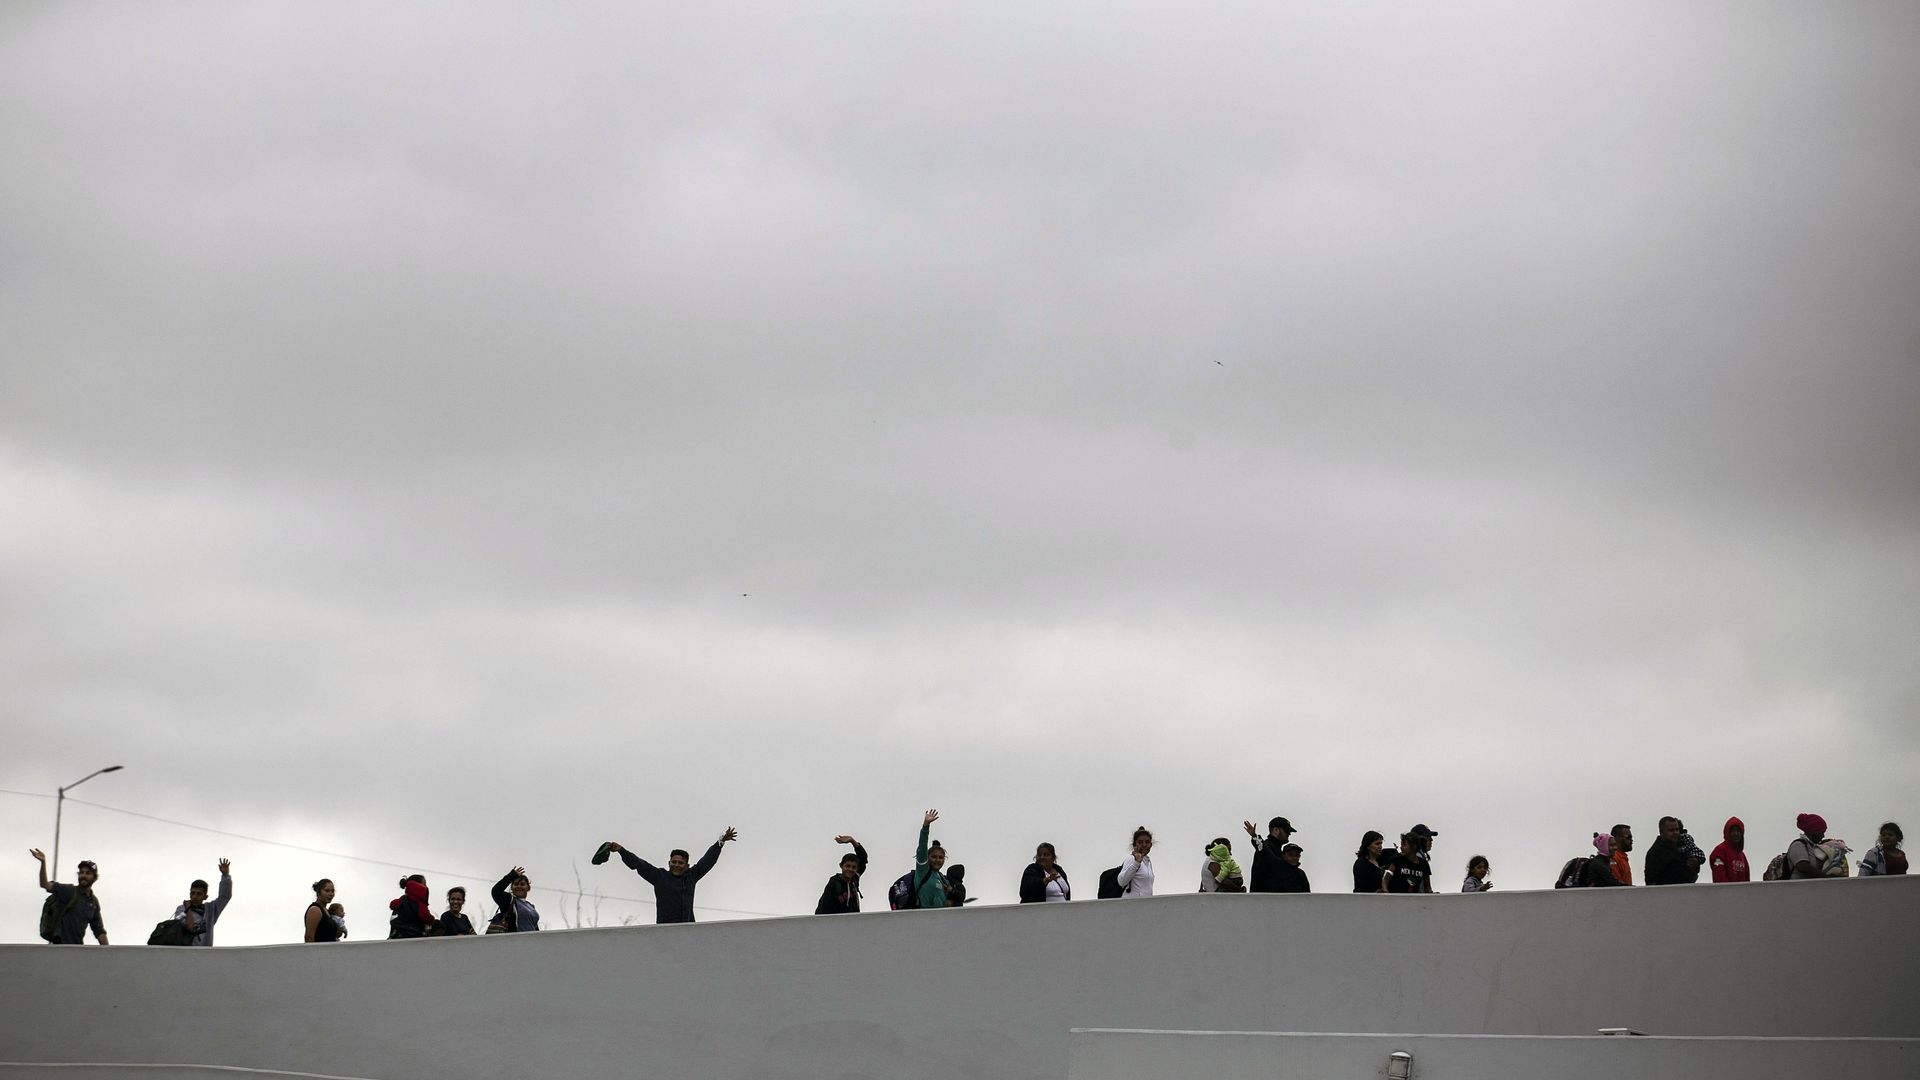 People waving overtop of a white wall with a grey sky in the background